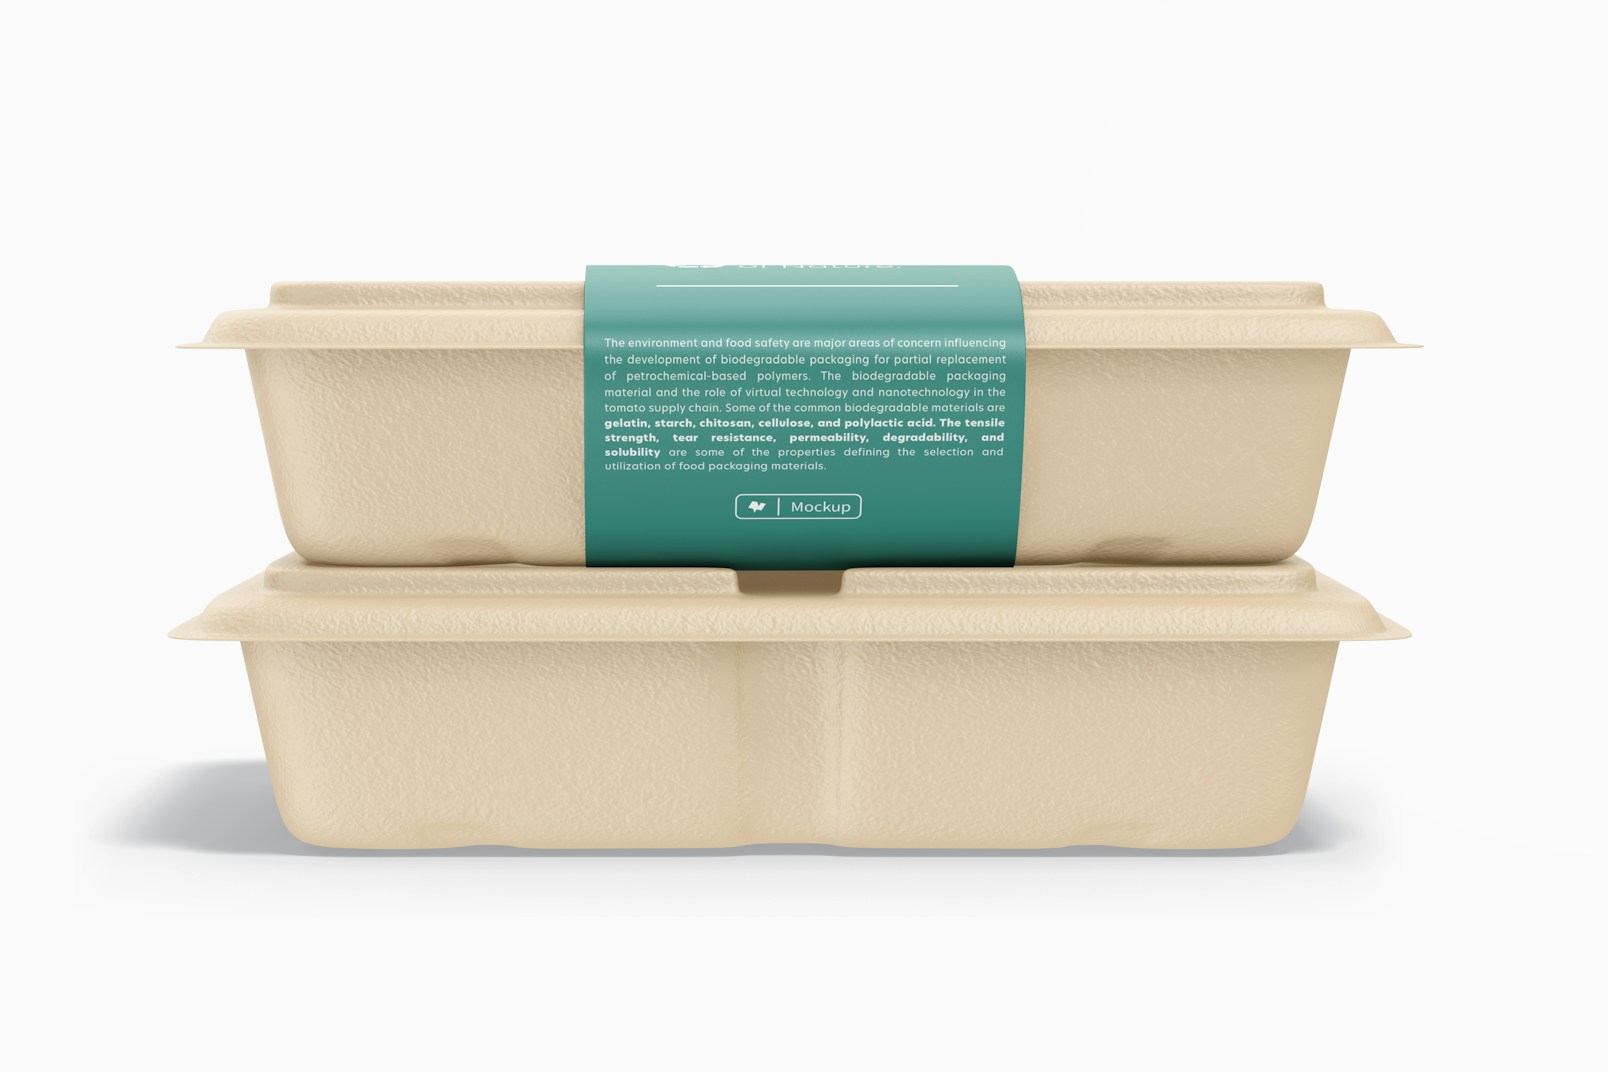 Biodegradable Food Containers Mockup, Stacked